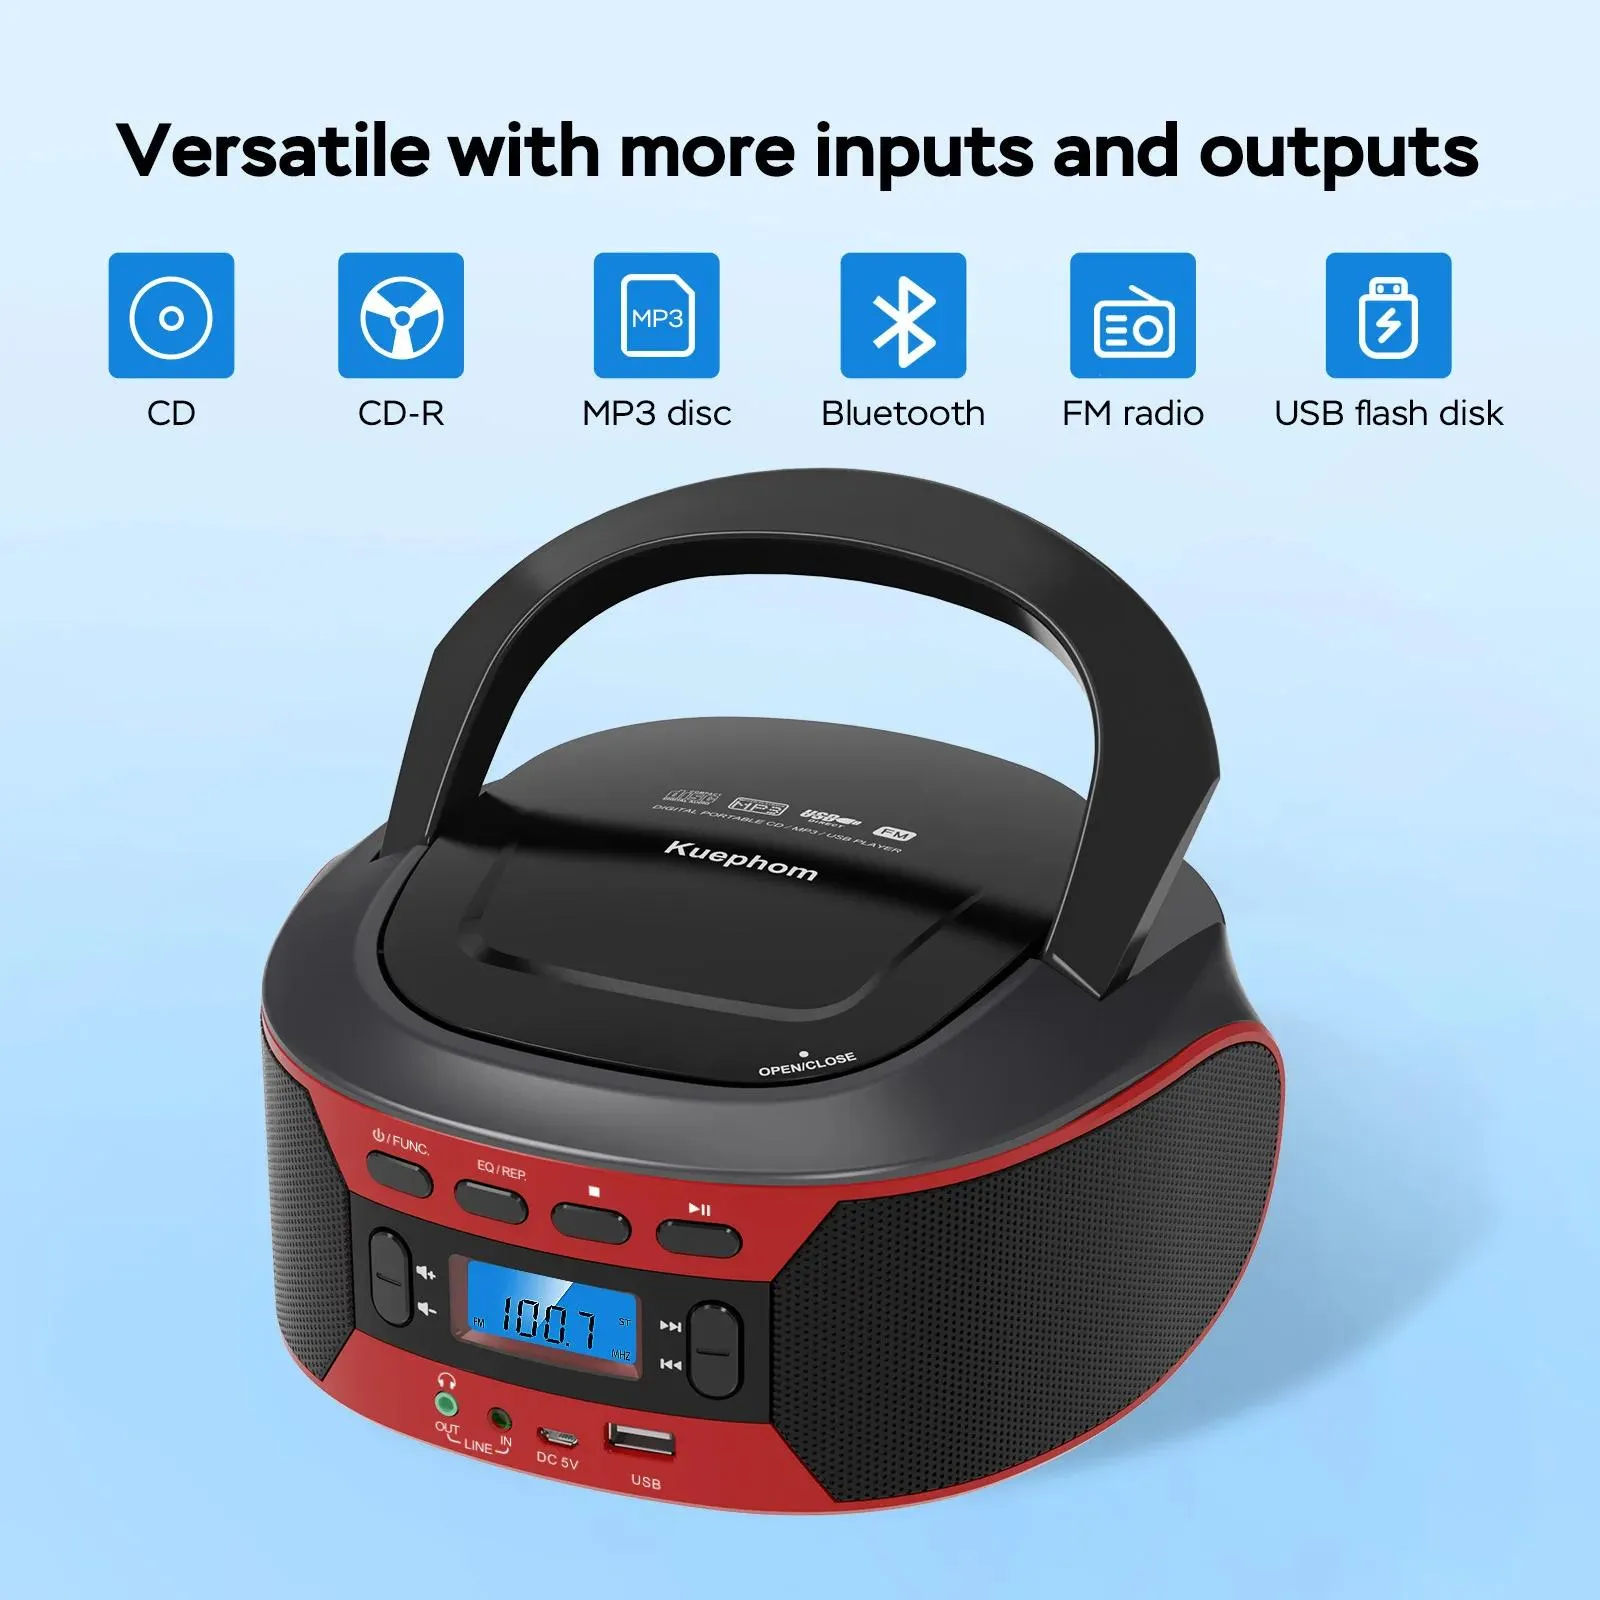 Player Stereo Portable CD Player Bluetooth CD Boombox FM Radio with AUX/USB Playback and Earphone Jack for Home/Car/Stage